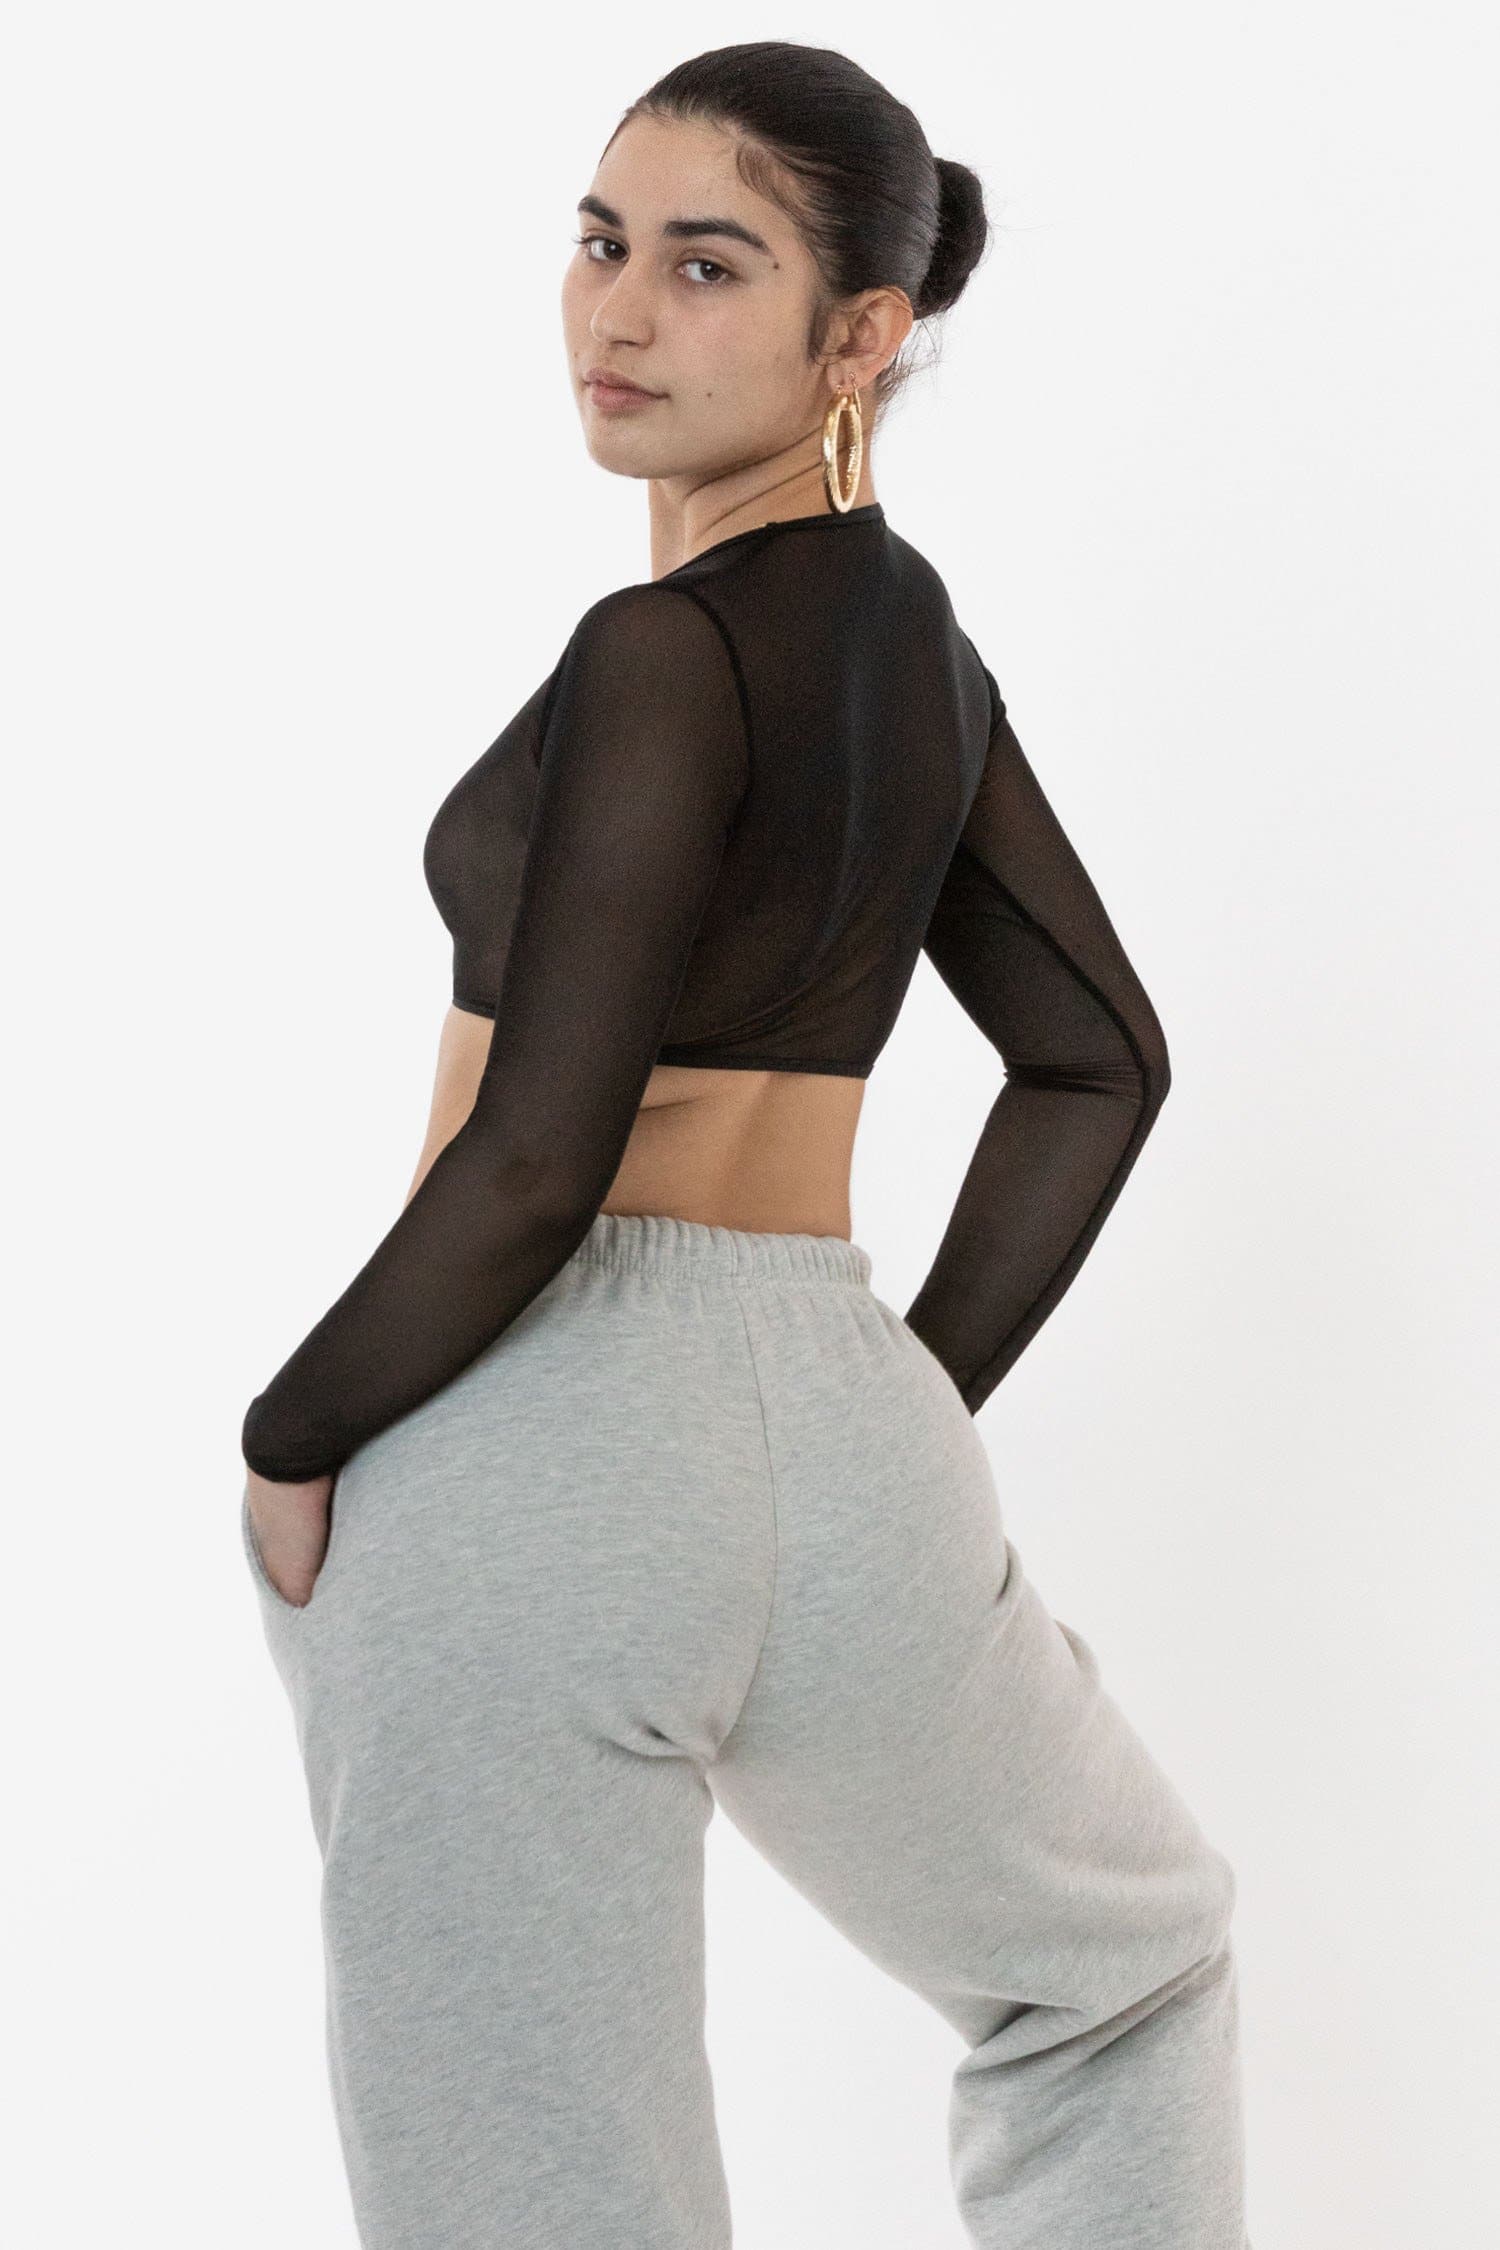 Los Angeles Apparel | Micro Mesh Long Sleeve Crop Top for Women in Black, Size Small